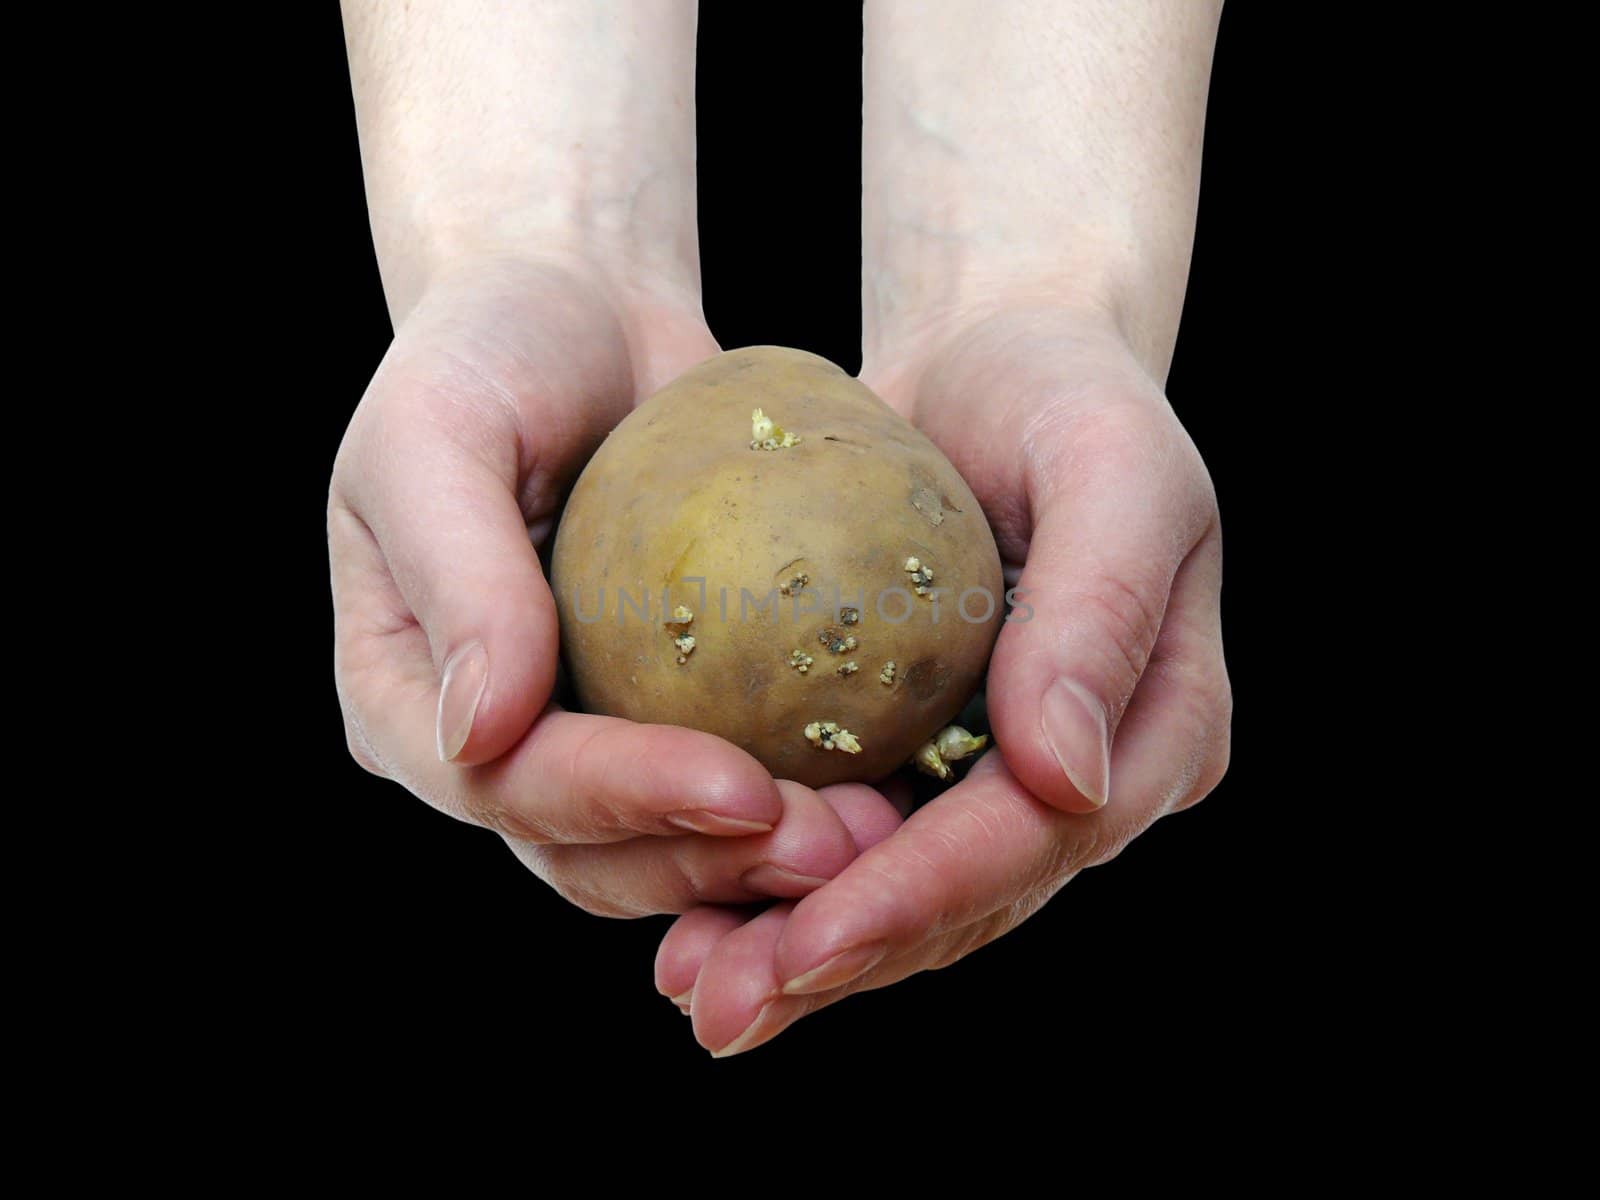 Potato in the hands on the black background